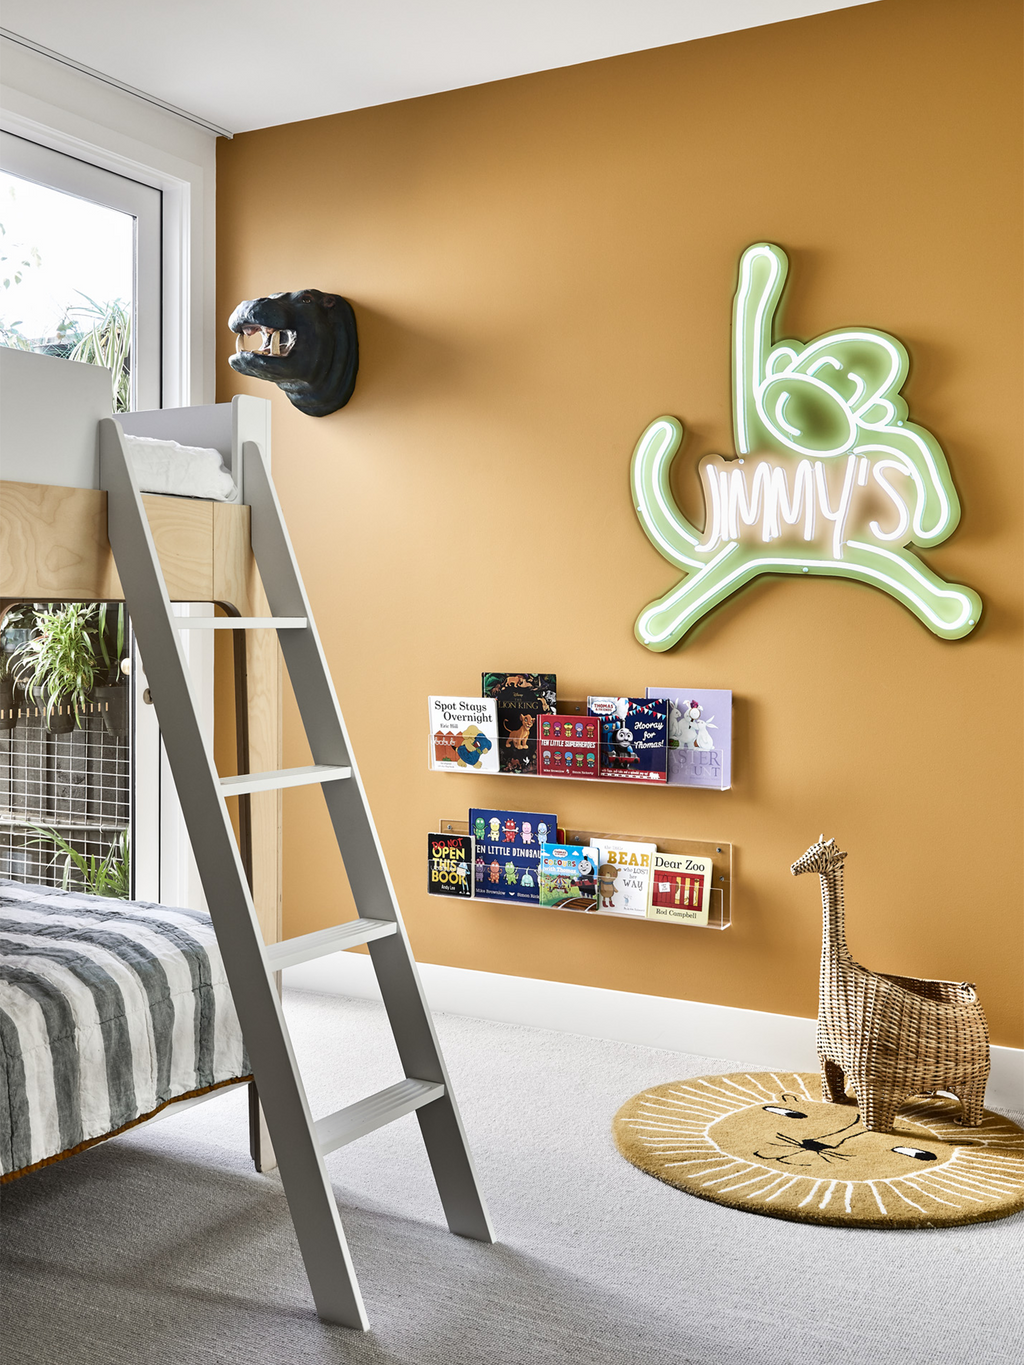 Kids bedroom with orange statement wall and green neon sign